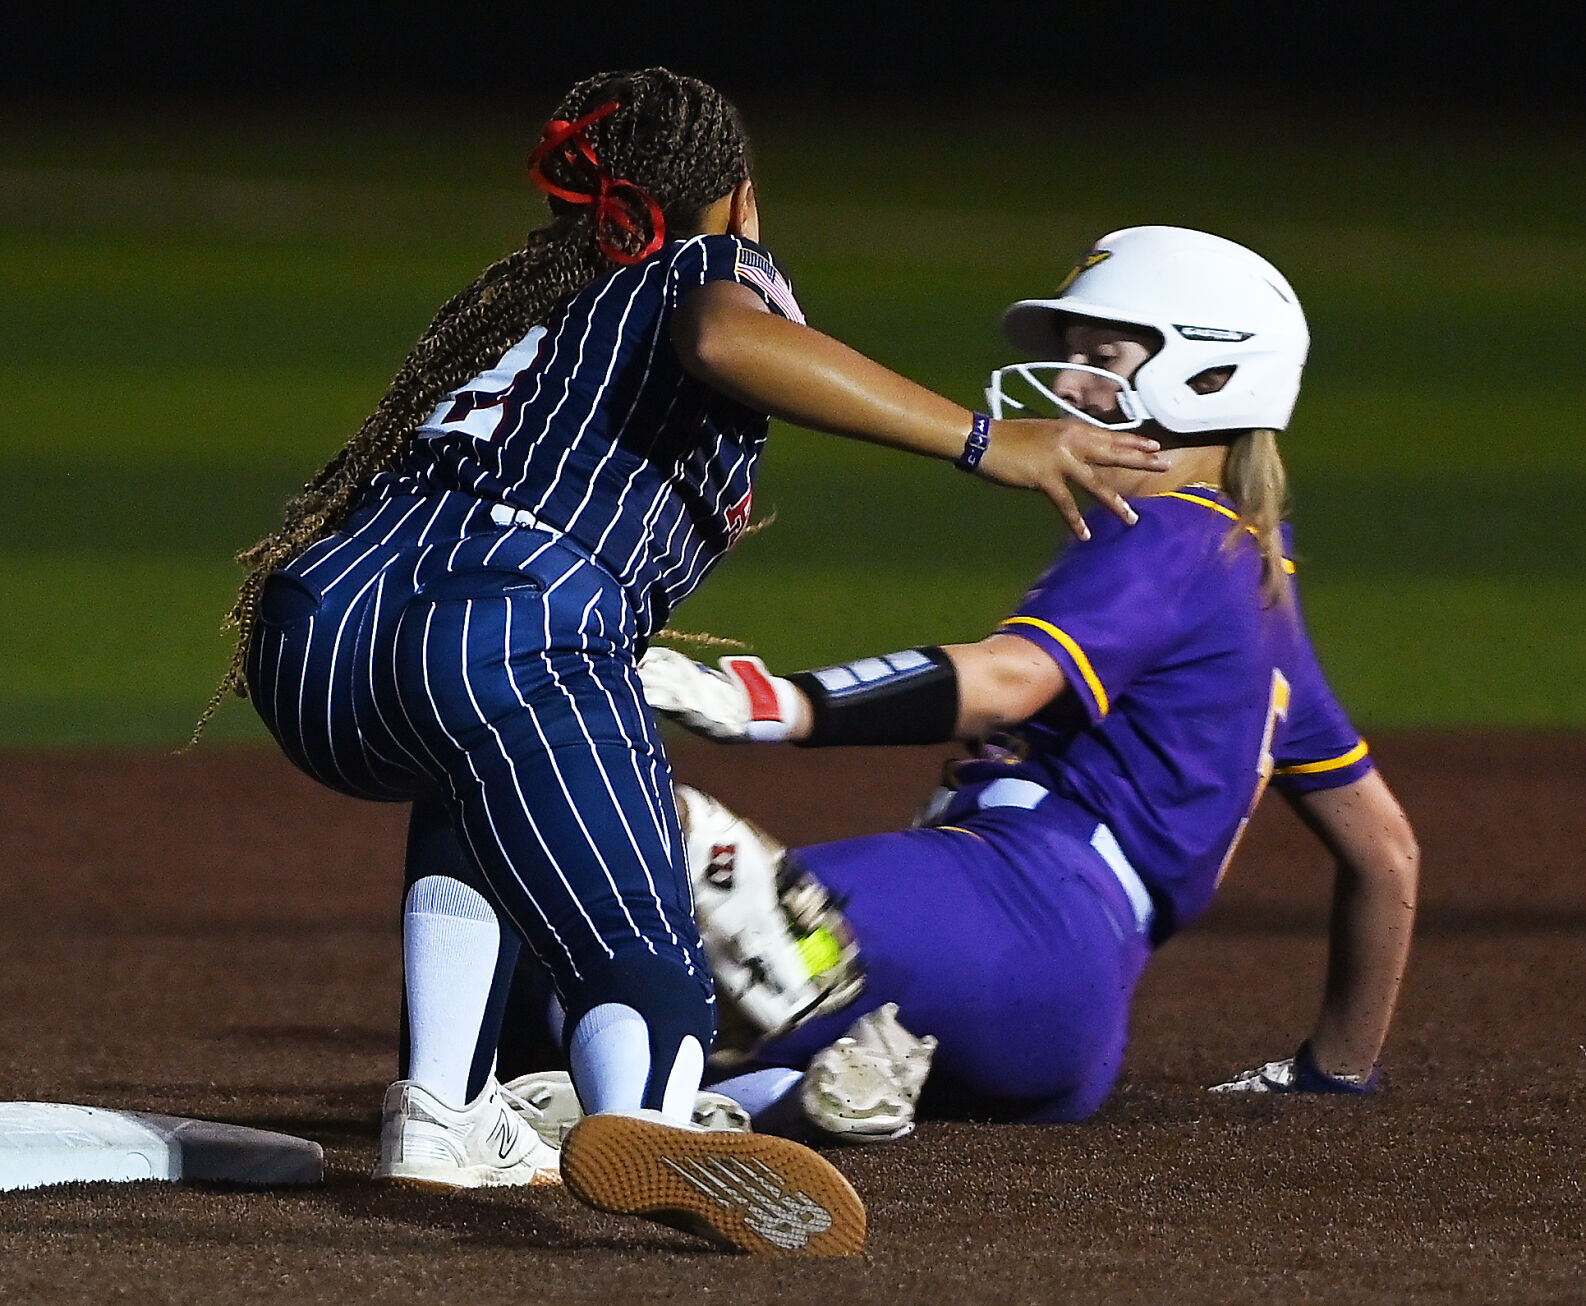 Four local softball teams advance to Round 2 of playoffs behind perfect first round